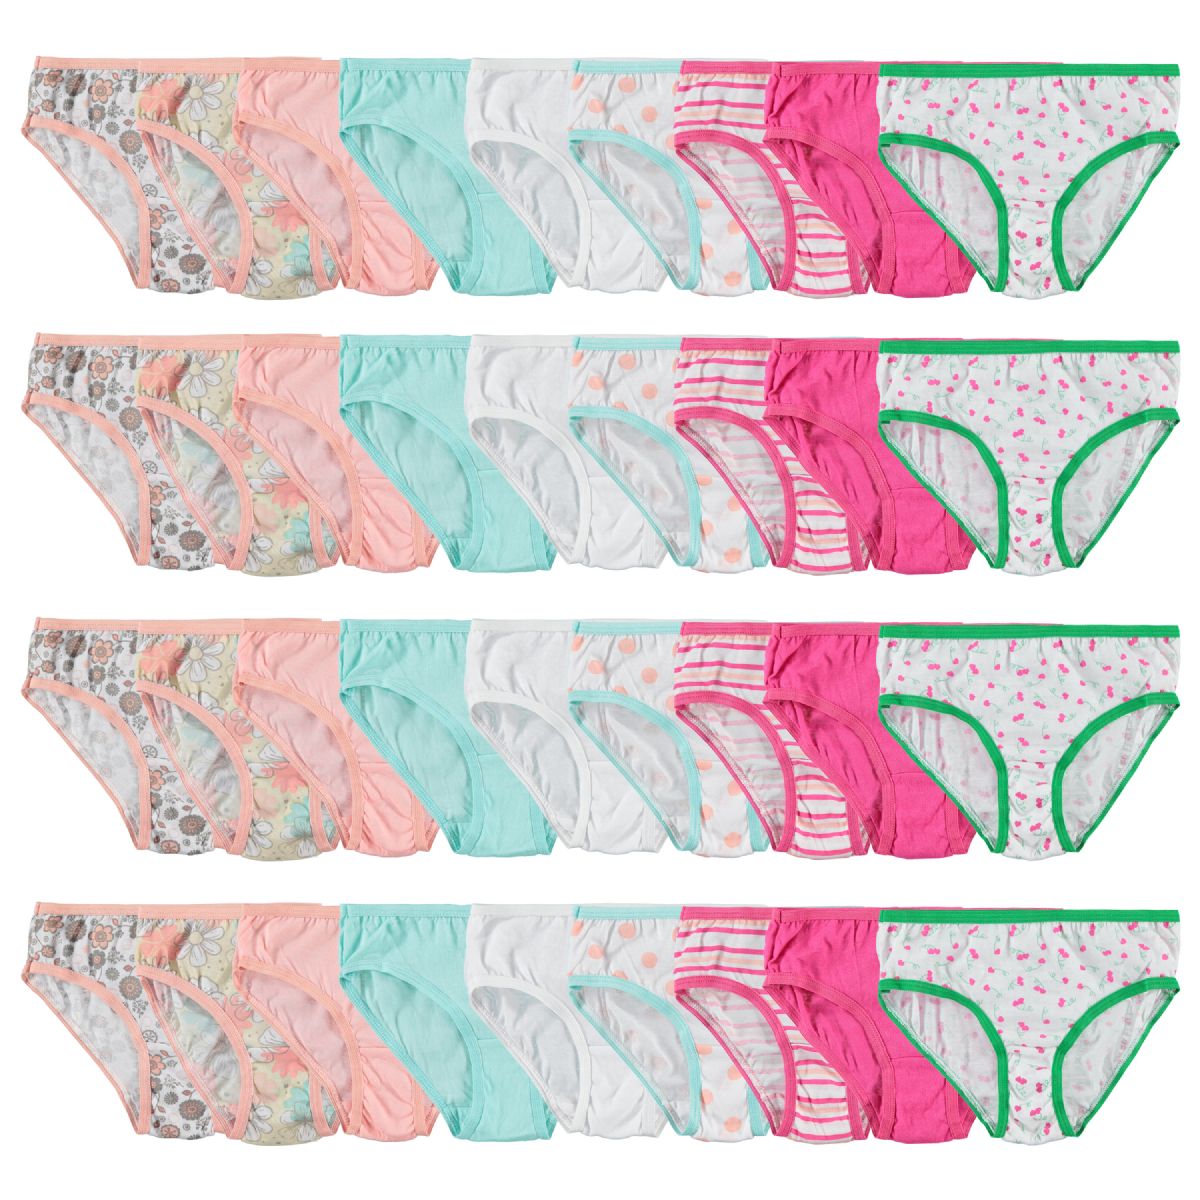 72 Wholesale Girls Cotton Blend Assorted Printed Underwear Size 4t - at 